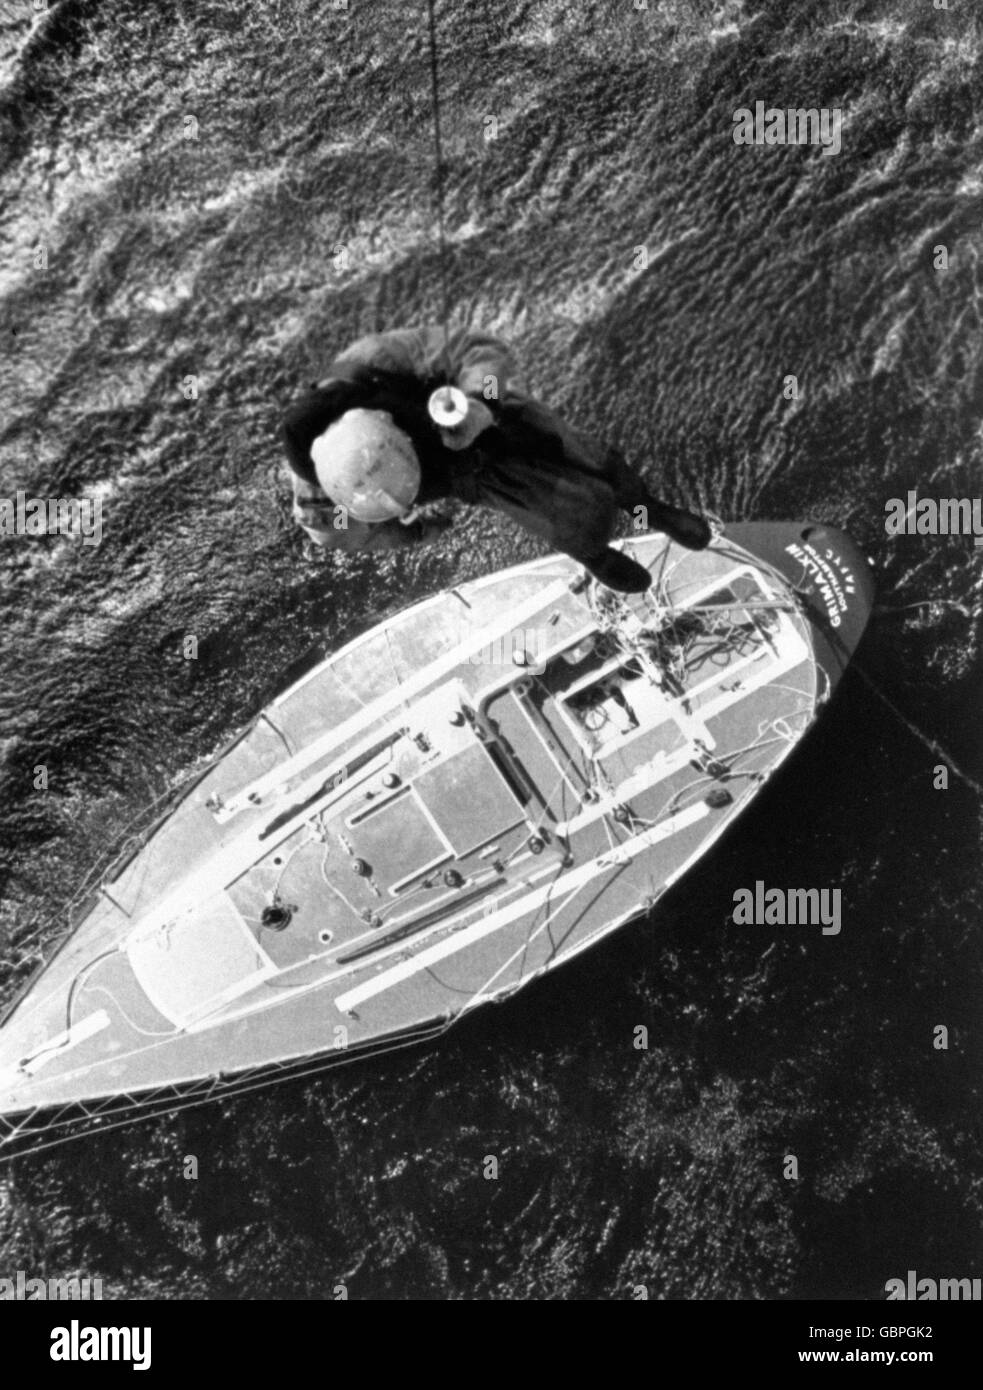 A helicopter crewman hangs from a winch to check the battered yacht Grimalkin for possible survivors in the wake of the Fastnet race disaster. Stock Photo